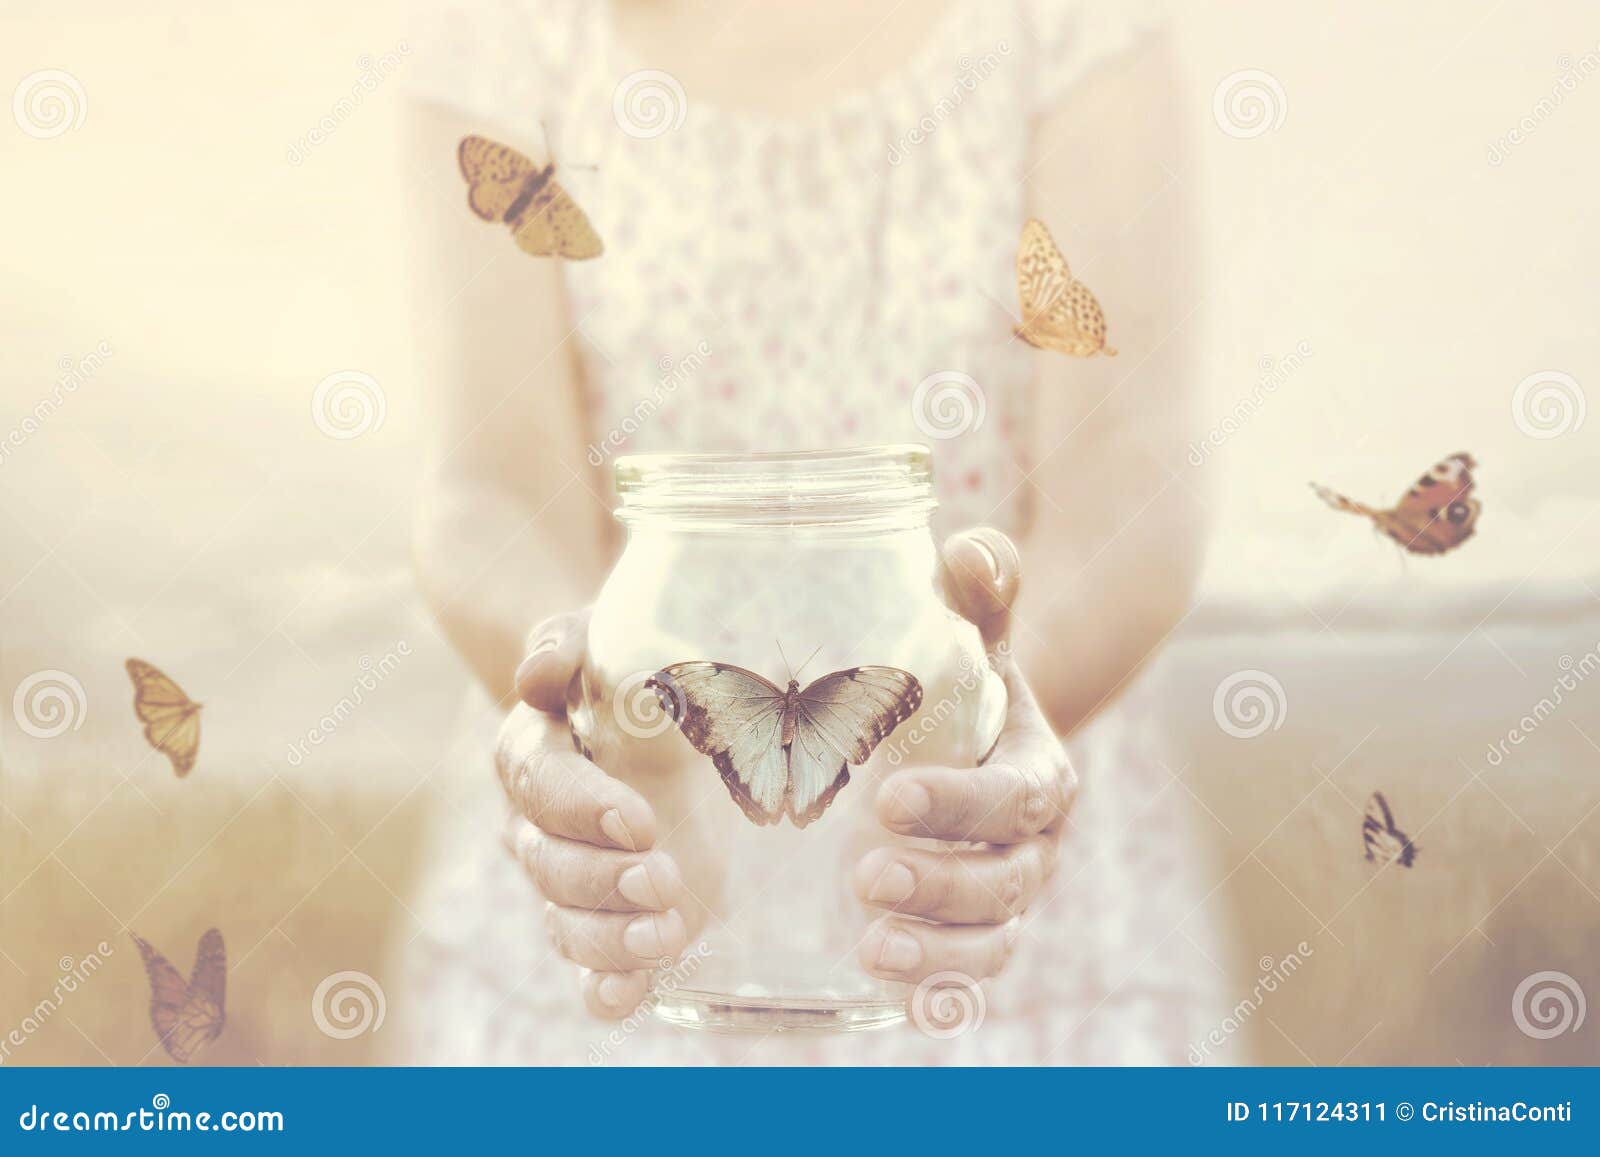 woman gives freedom to some butterflies enclosed in a glass vase